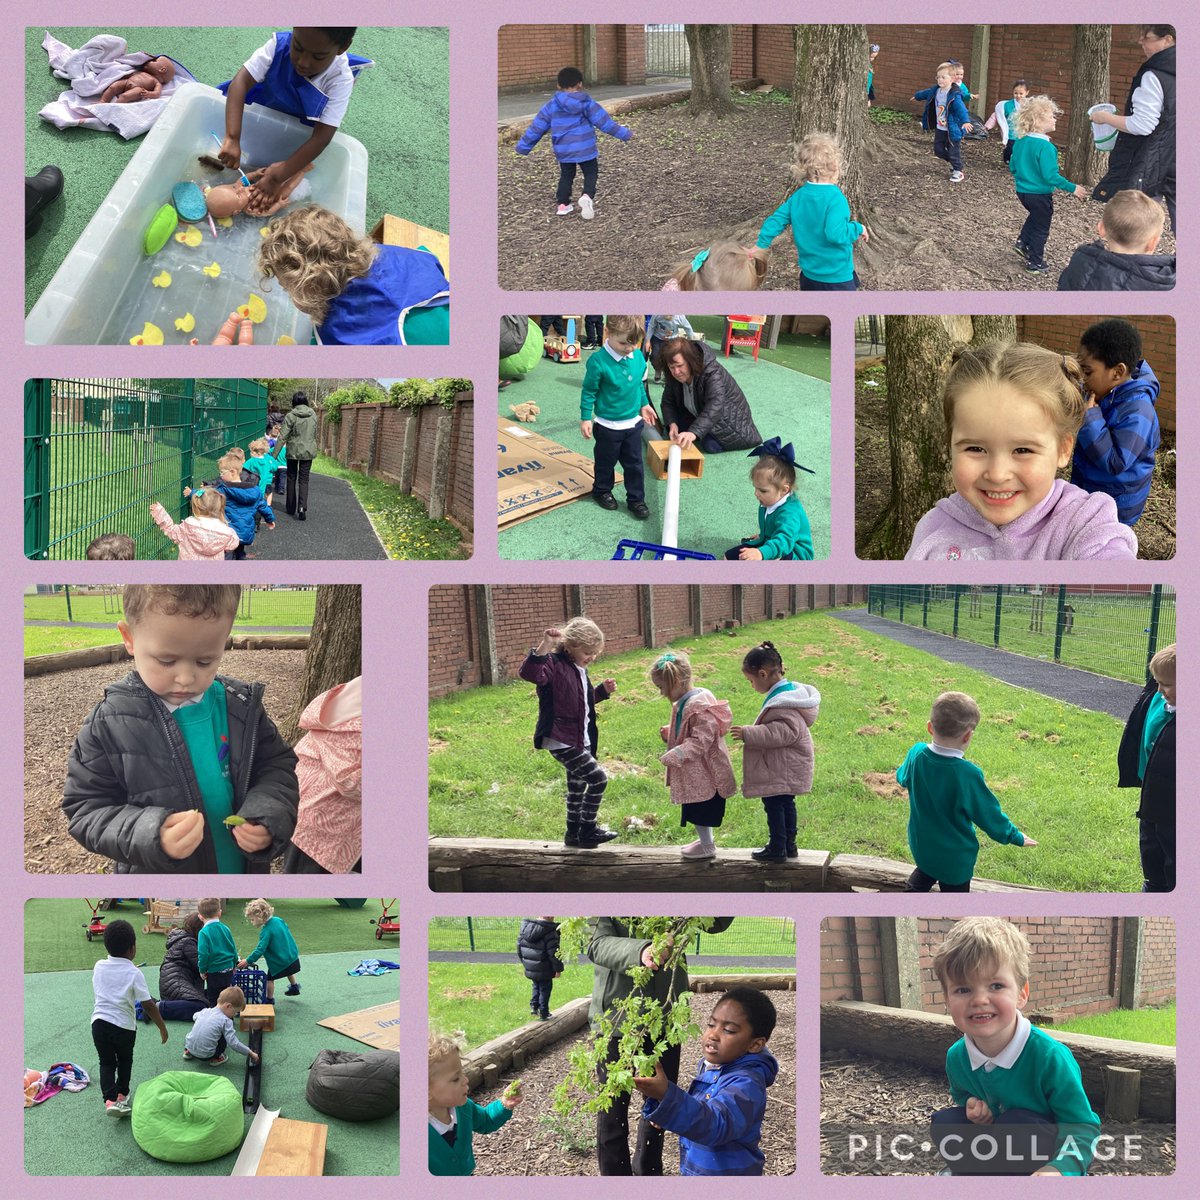 Afternoon nursery took all their activities outside today. Gwaith hwyl pawb! #bluebellmps #mpsbluebell